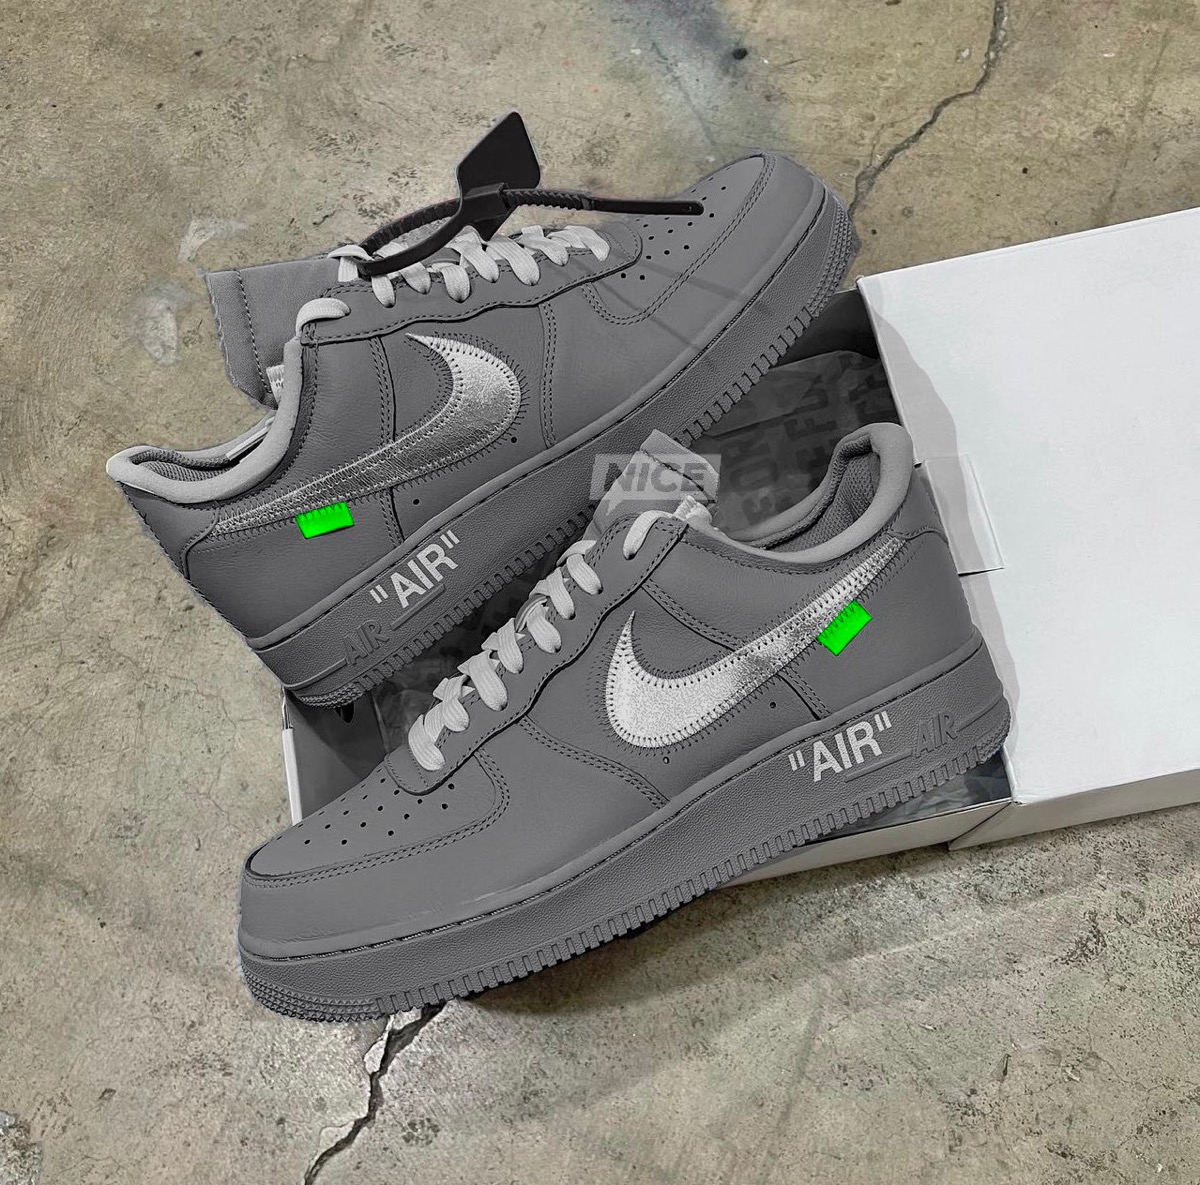 Off-White™ × Nike Air Force Low “Ghost Grey”が2023年春に発売予定か UP TO DATE